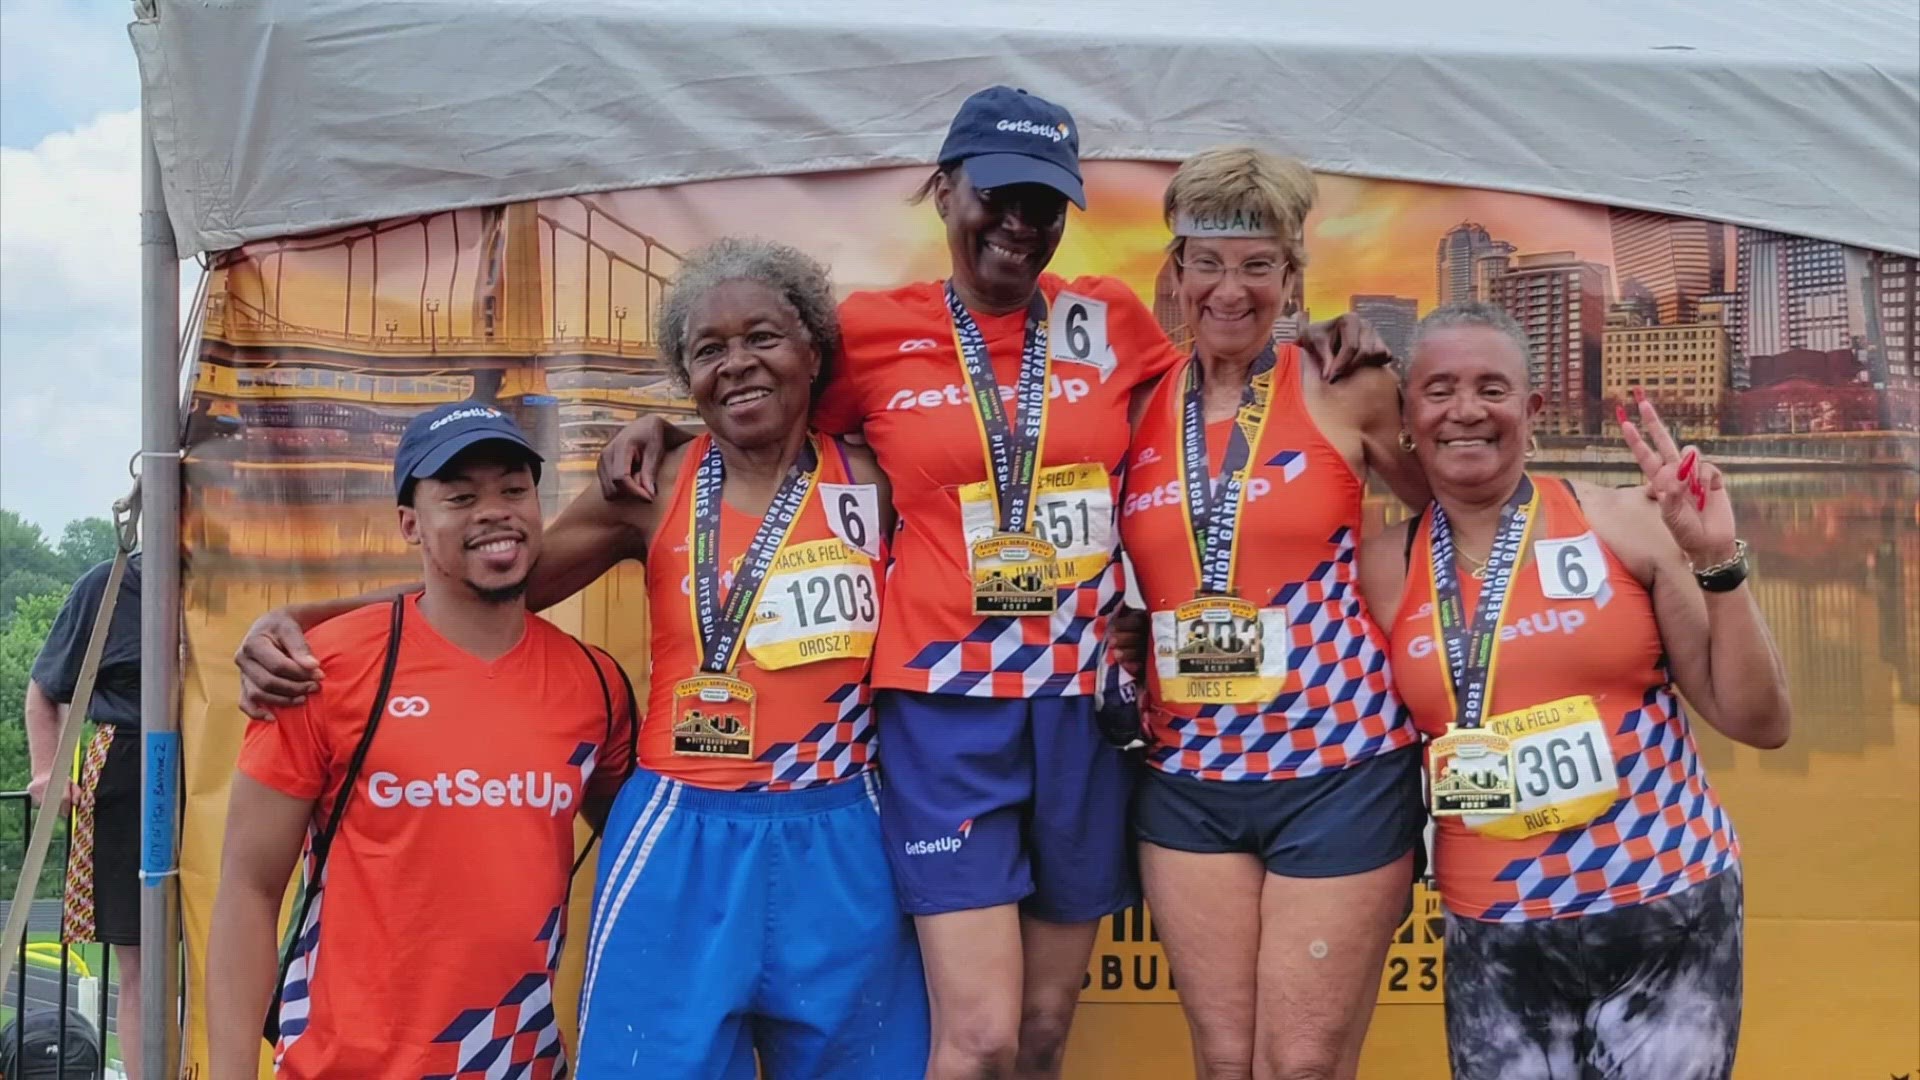 Strict track and gym workouts paid off for Madonna Hanna. The 70-year-old "Fast Fashionista" competed in three Senior Games events.